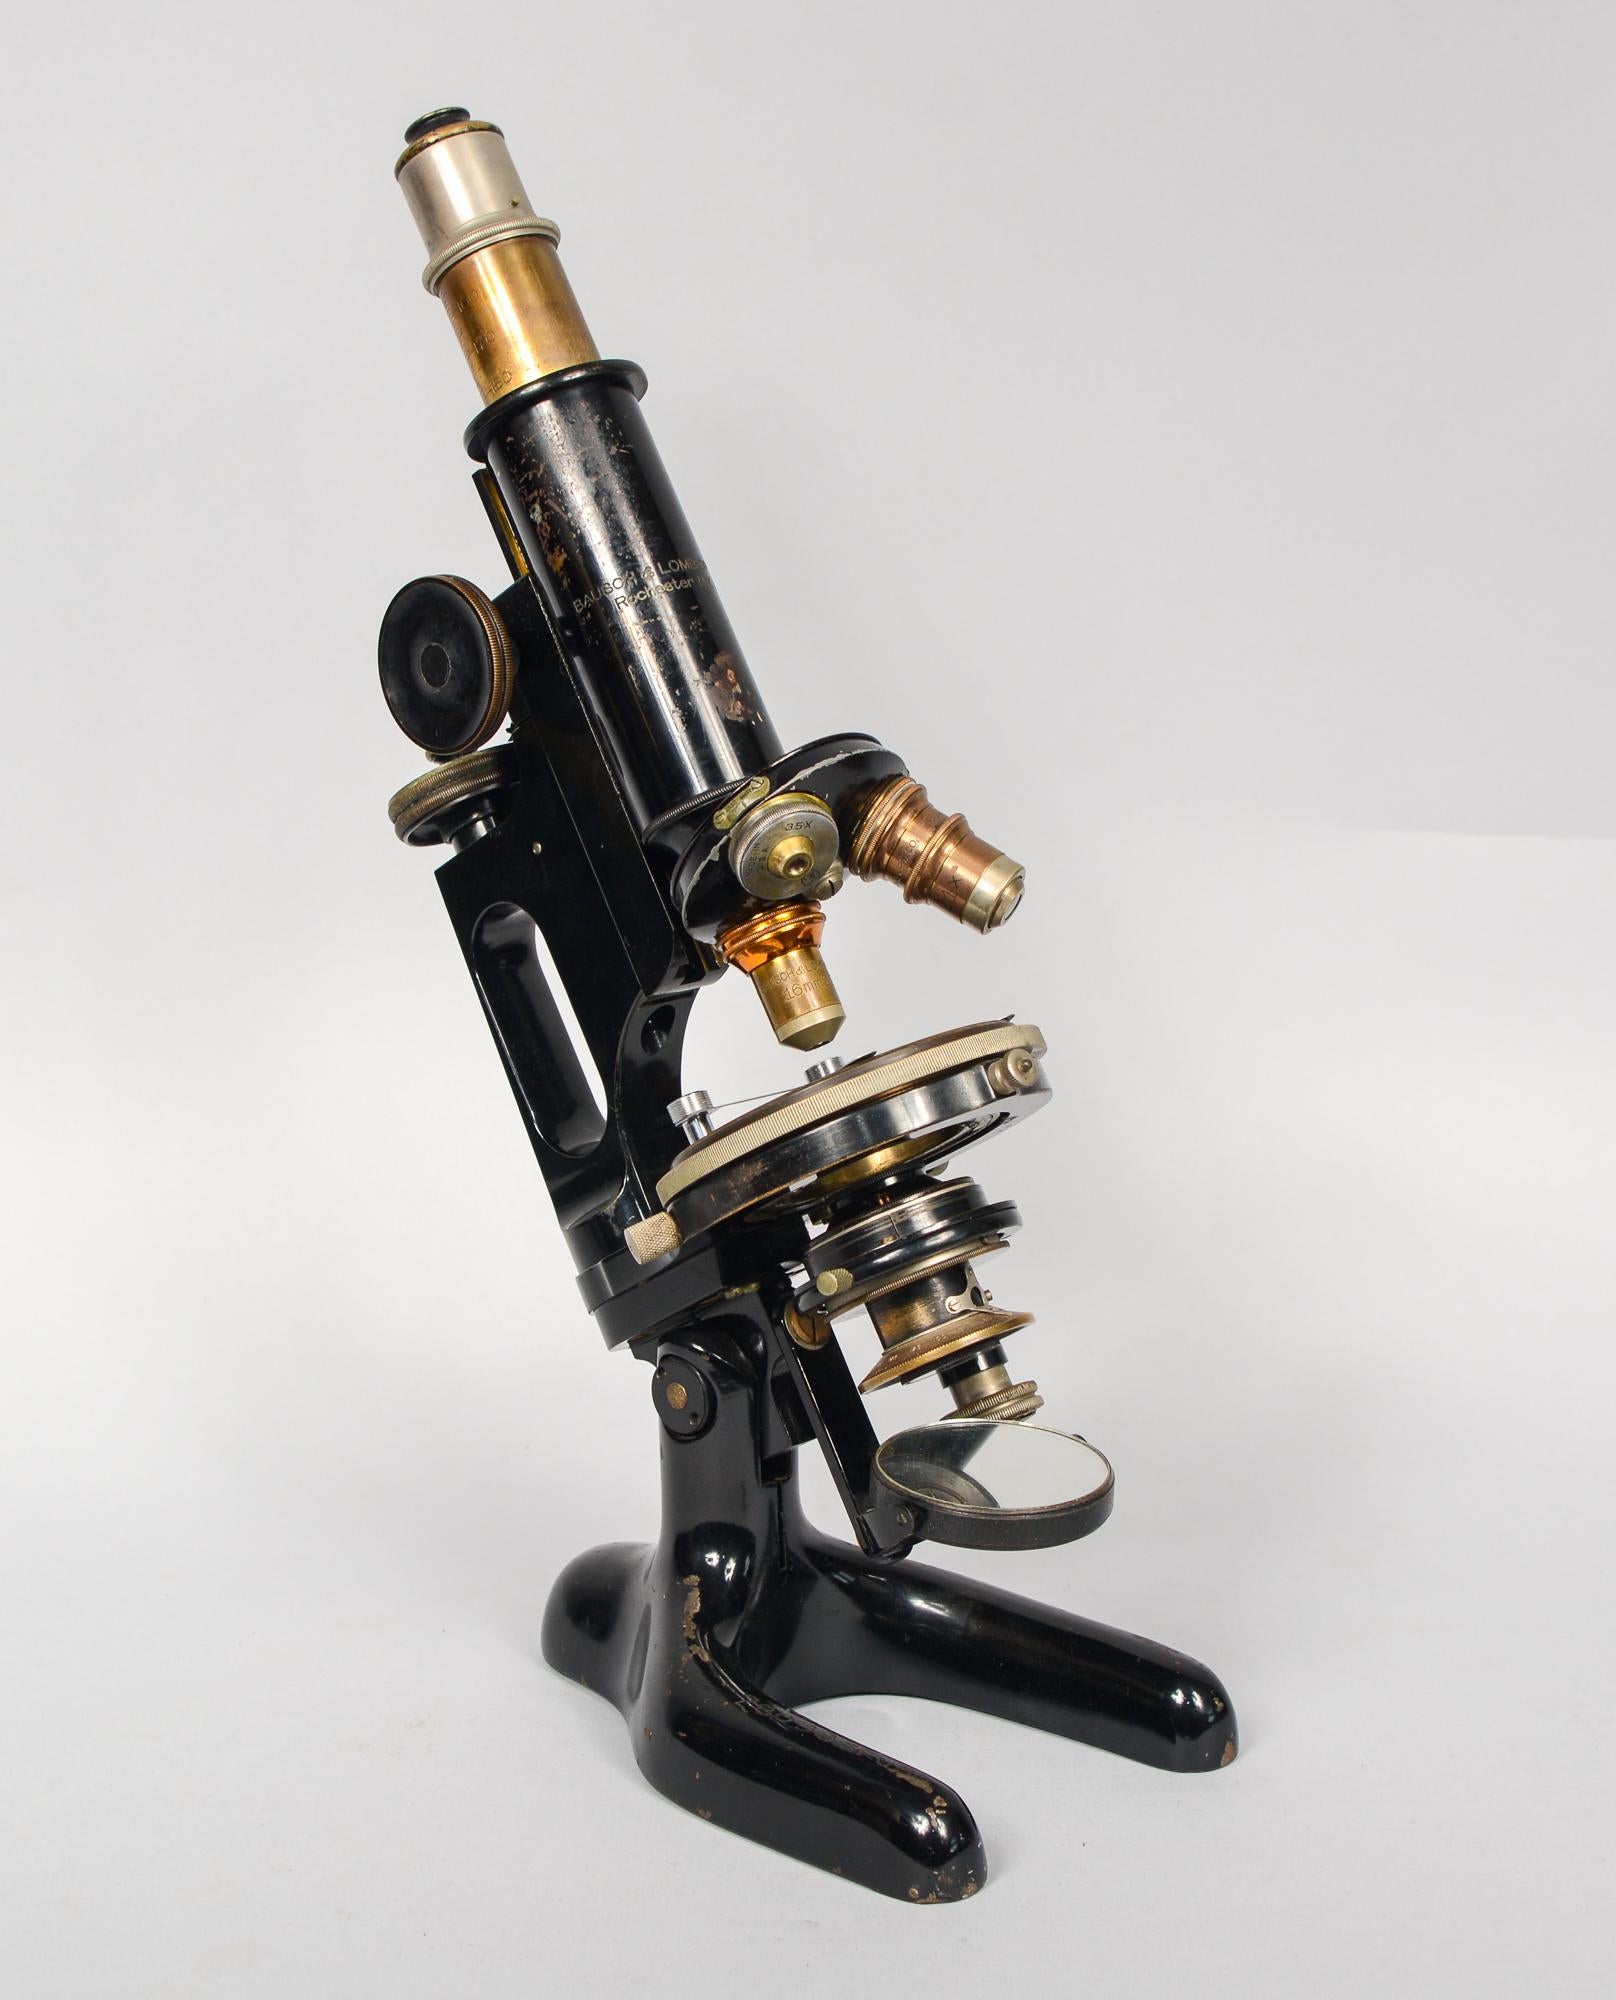 Bausch and Lomb polarizing petrographic microscope. This microscope has three objectives and a rotating stage. The dimensions listed are for the box. The microscope is 4.25 inches deep, 7 inches wide and 13 inches tall. This is from an older